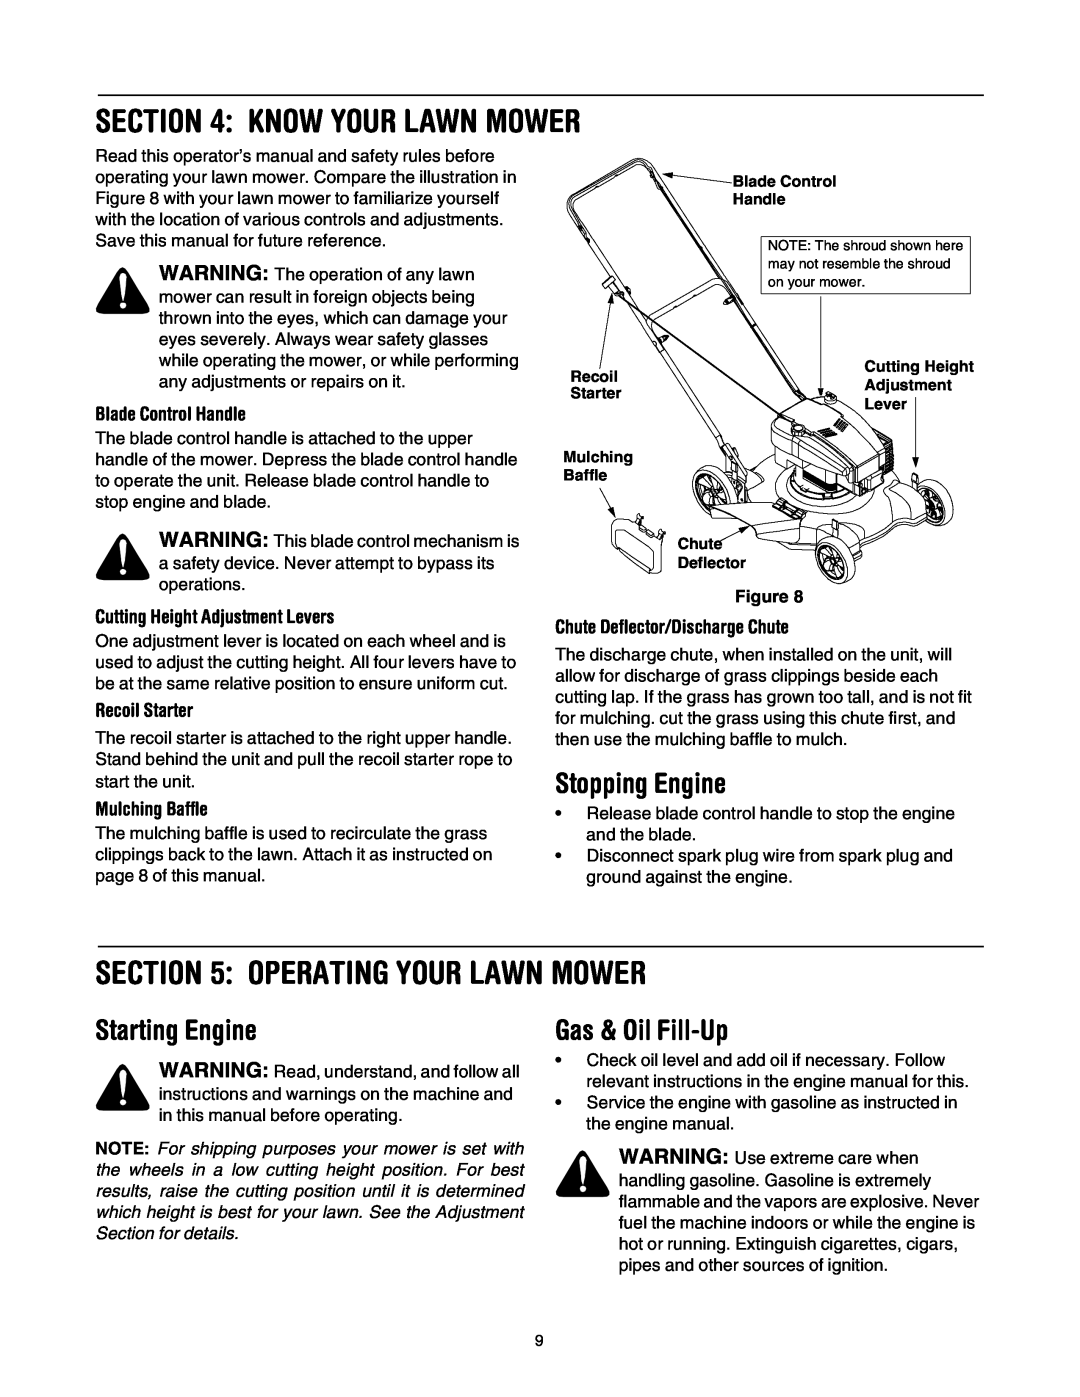 Bolens 84 manual Know Your Lawn Mower, Operating Your Lawn Mower, Stopping Engine, Starting Engine, Gas & Oil Fill-Up 